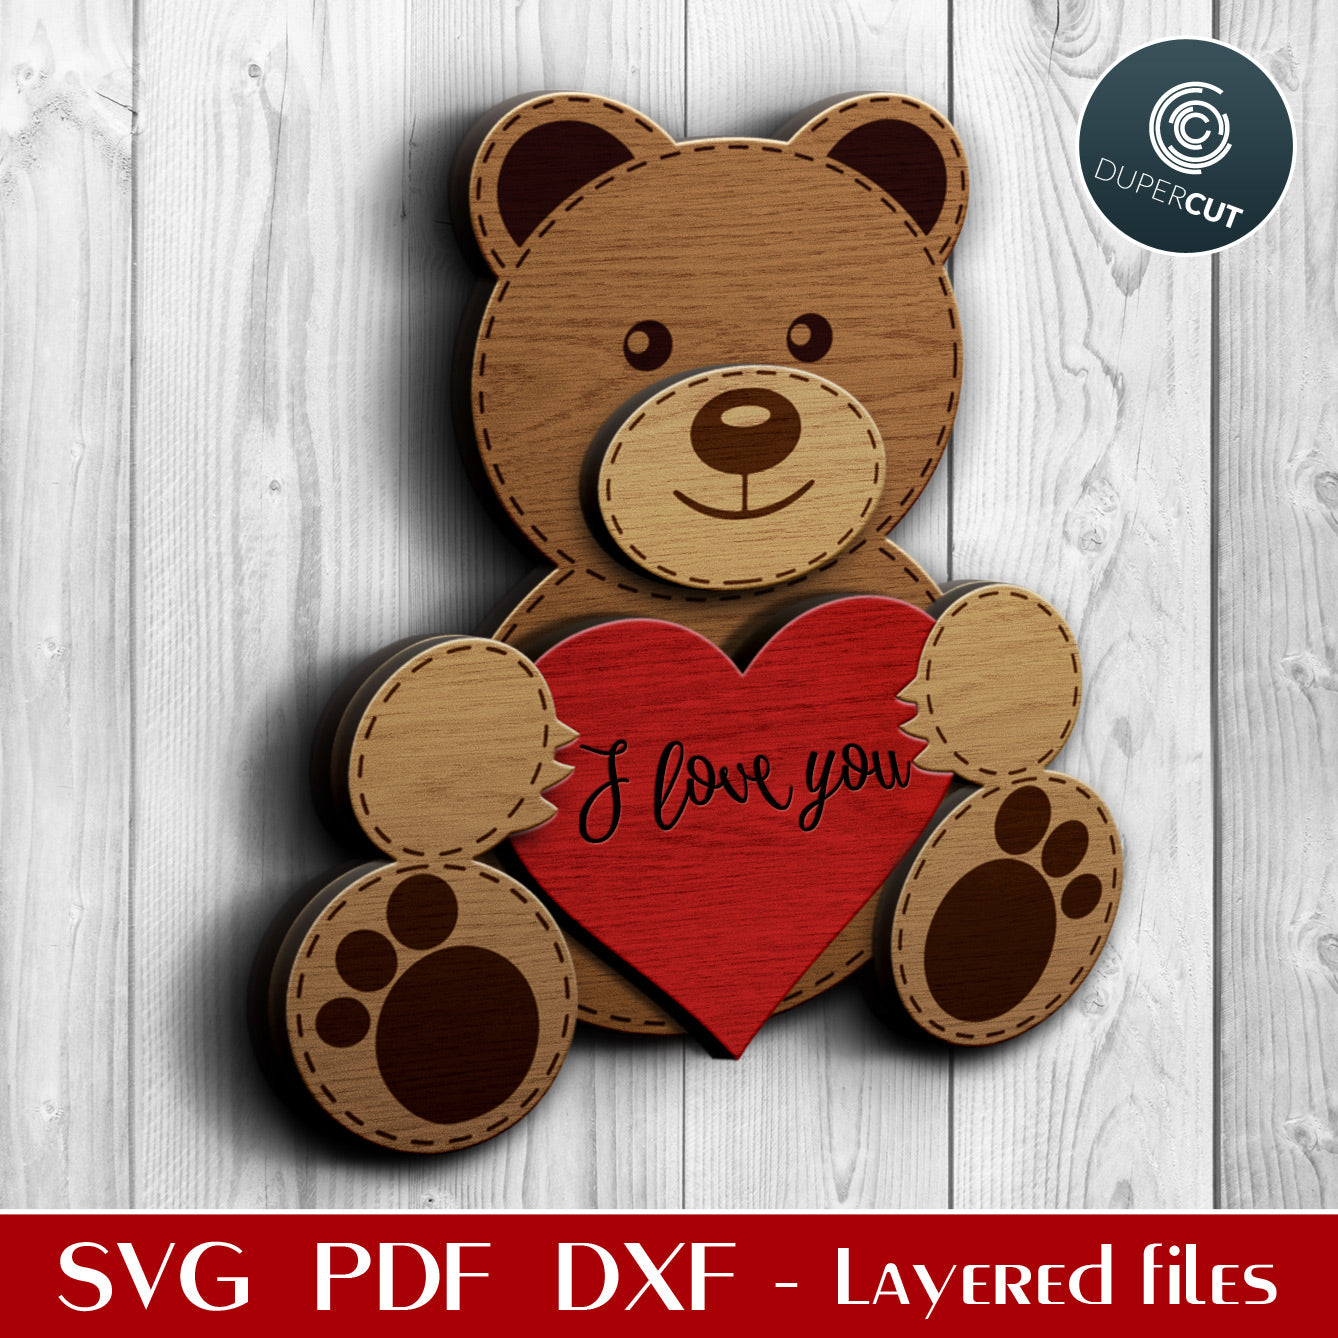 Personalized Teddy bear with heart - layered Valentine's Day template - SVG PDF laser cutting files for Glowforge, Cricut, Silhouette, CNC Plasma machines by DuperCut